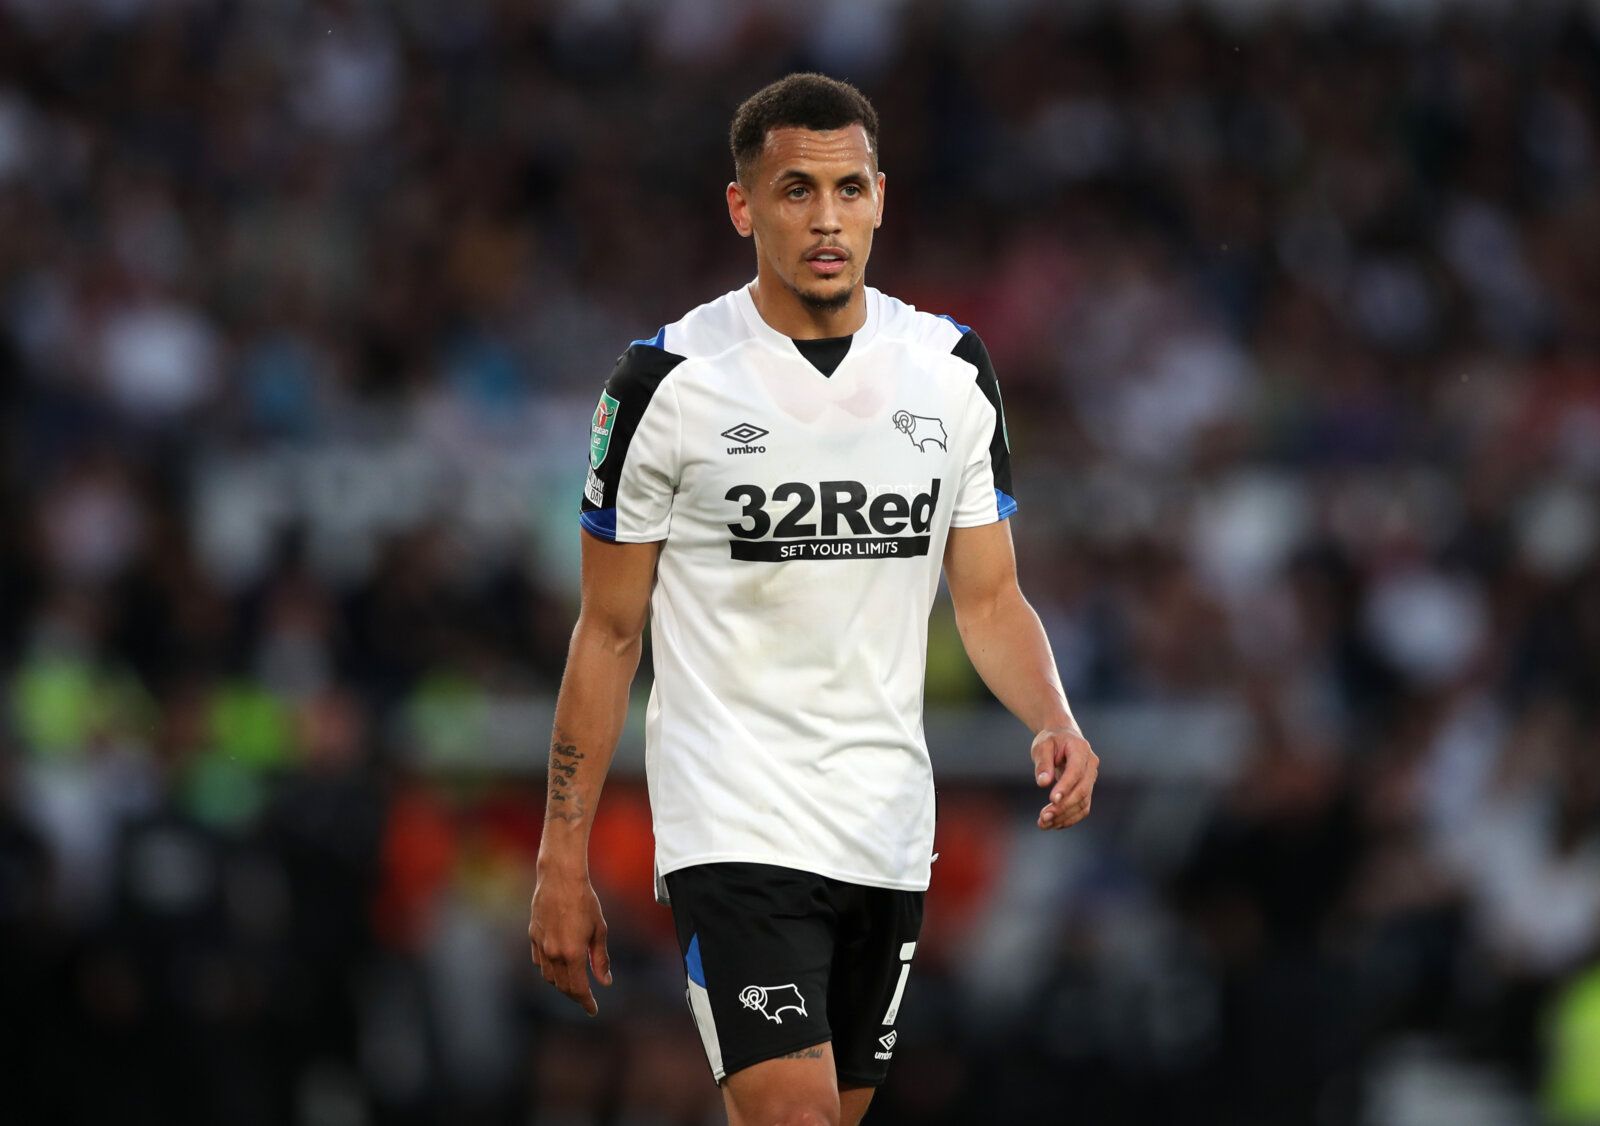 Soccer Football - Carabao Cup - First Round - Derby County v Salford City - Pride Park, Derby, Britain - August 10, 2021 Derby County's Ravel Morrison during the match Action Images/Peter Cziborra EDITORIAL USE ONLY. No use with unauthorized audio, video, data, fixture lists, club/league logos or 'live' services. Online in-match use limited to 75 images, no video emulation. No use in betting, games or single club /league/player publications.  Please contact your account representative for furthe